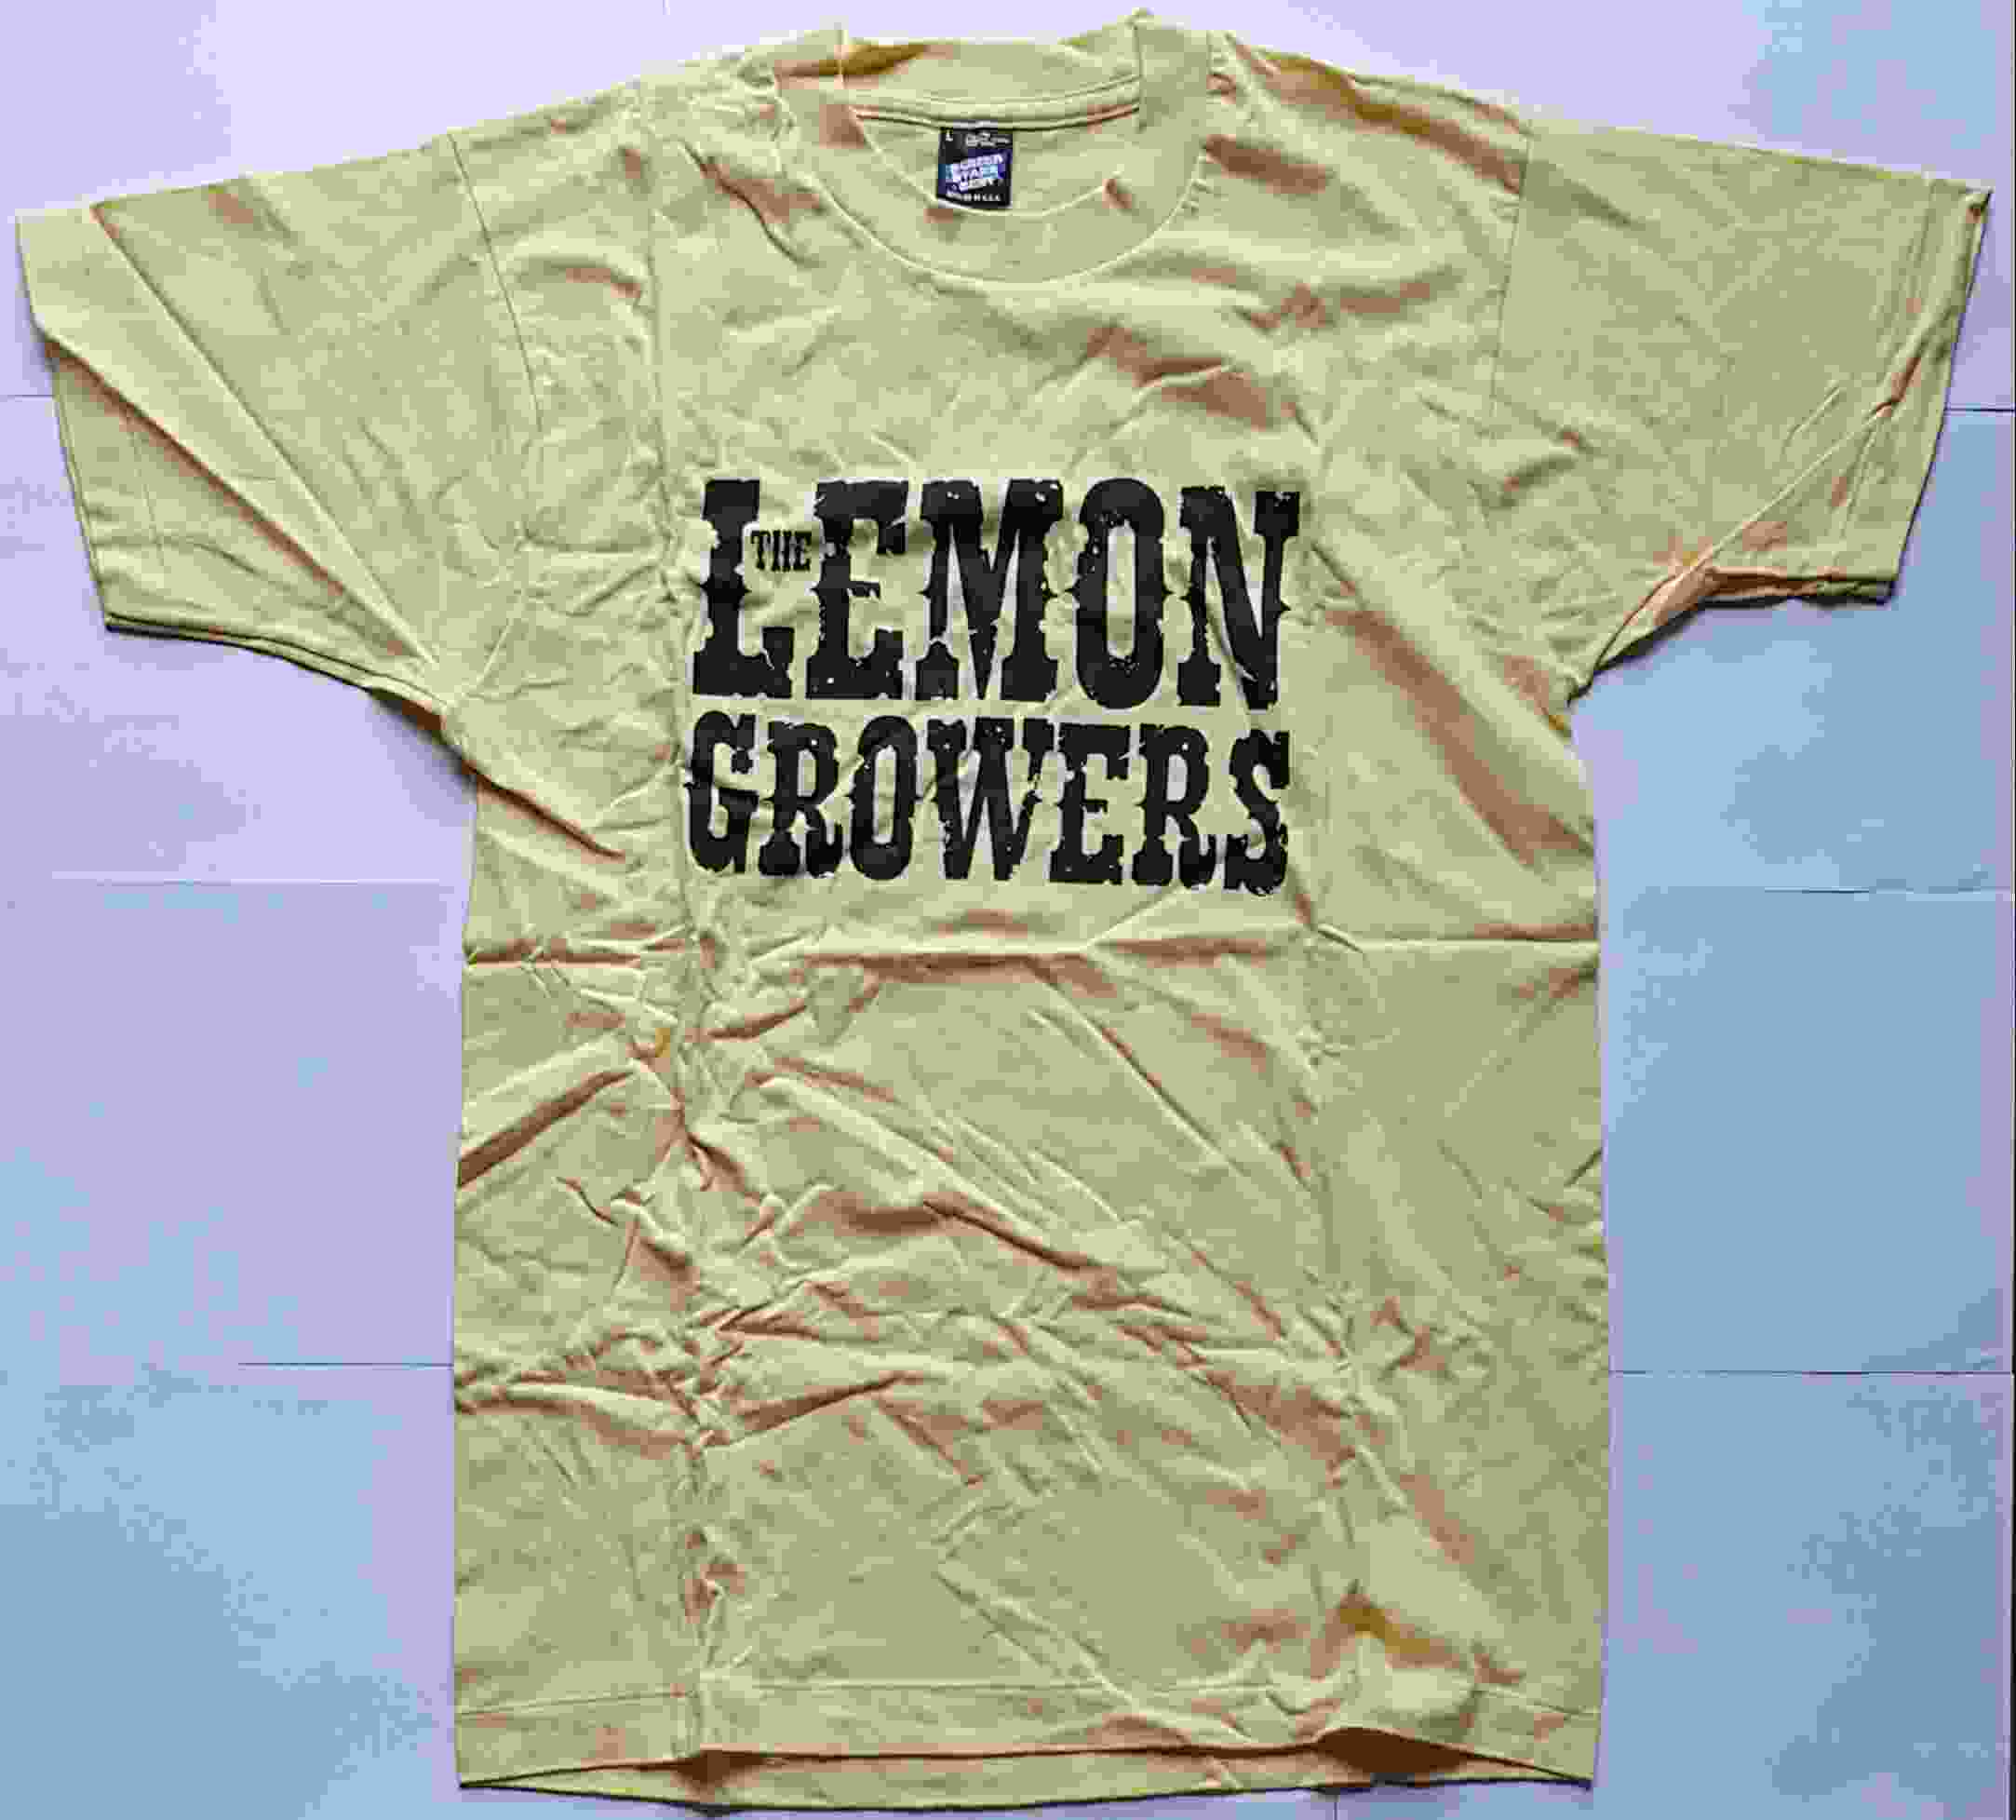 Picture of TS-LGGL Grow lemons by artist The Lemon Growers from The Stranglers clothes